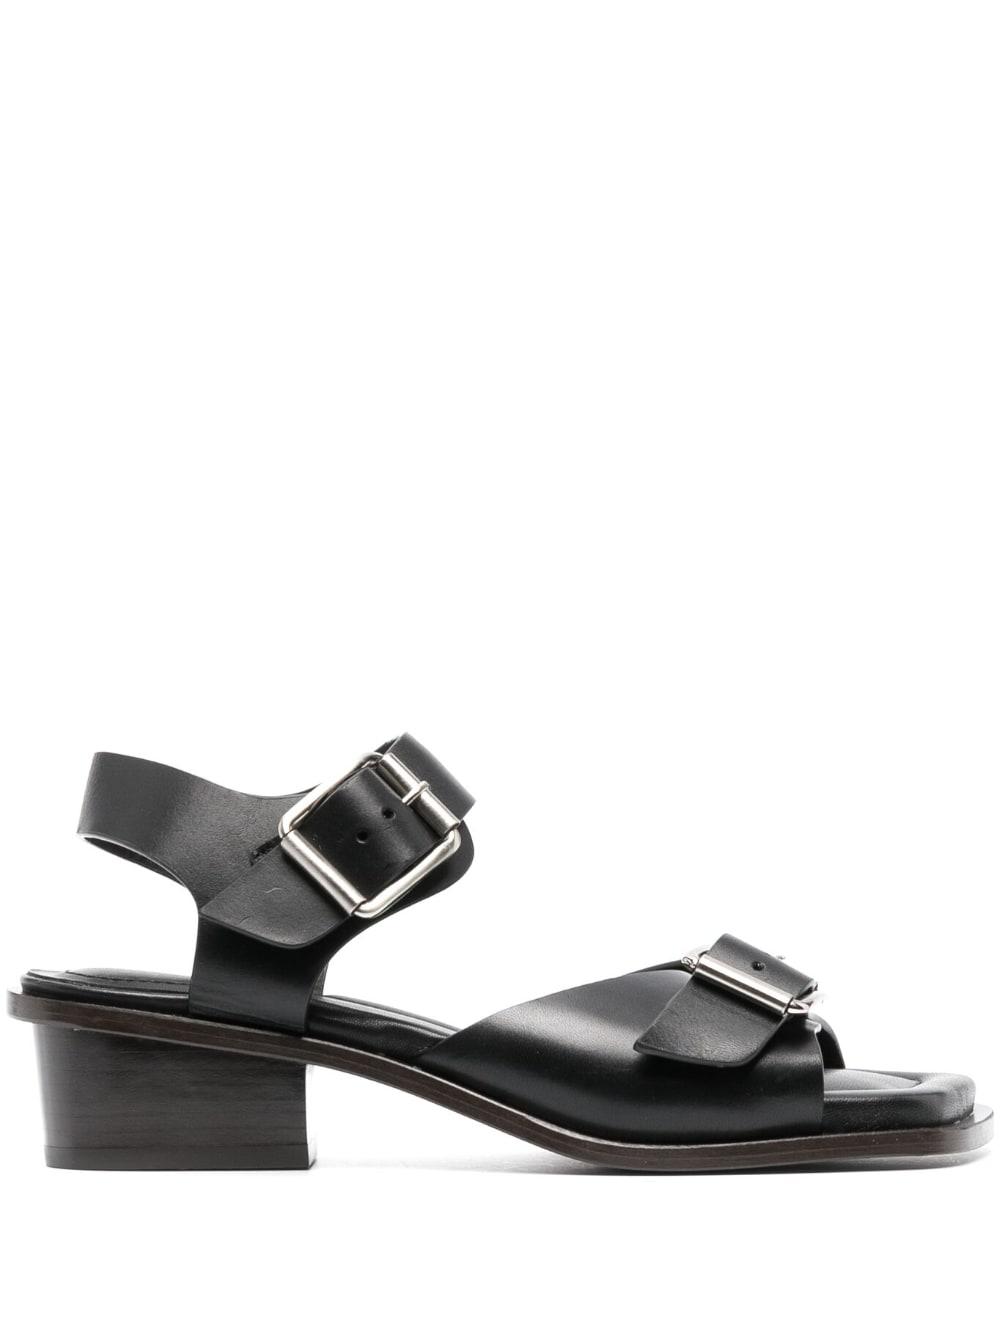 Lemaire 35mm Double-buckle Sandals in Black | Lyst UK